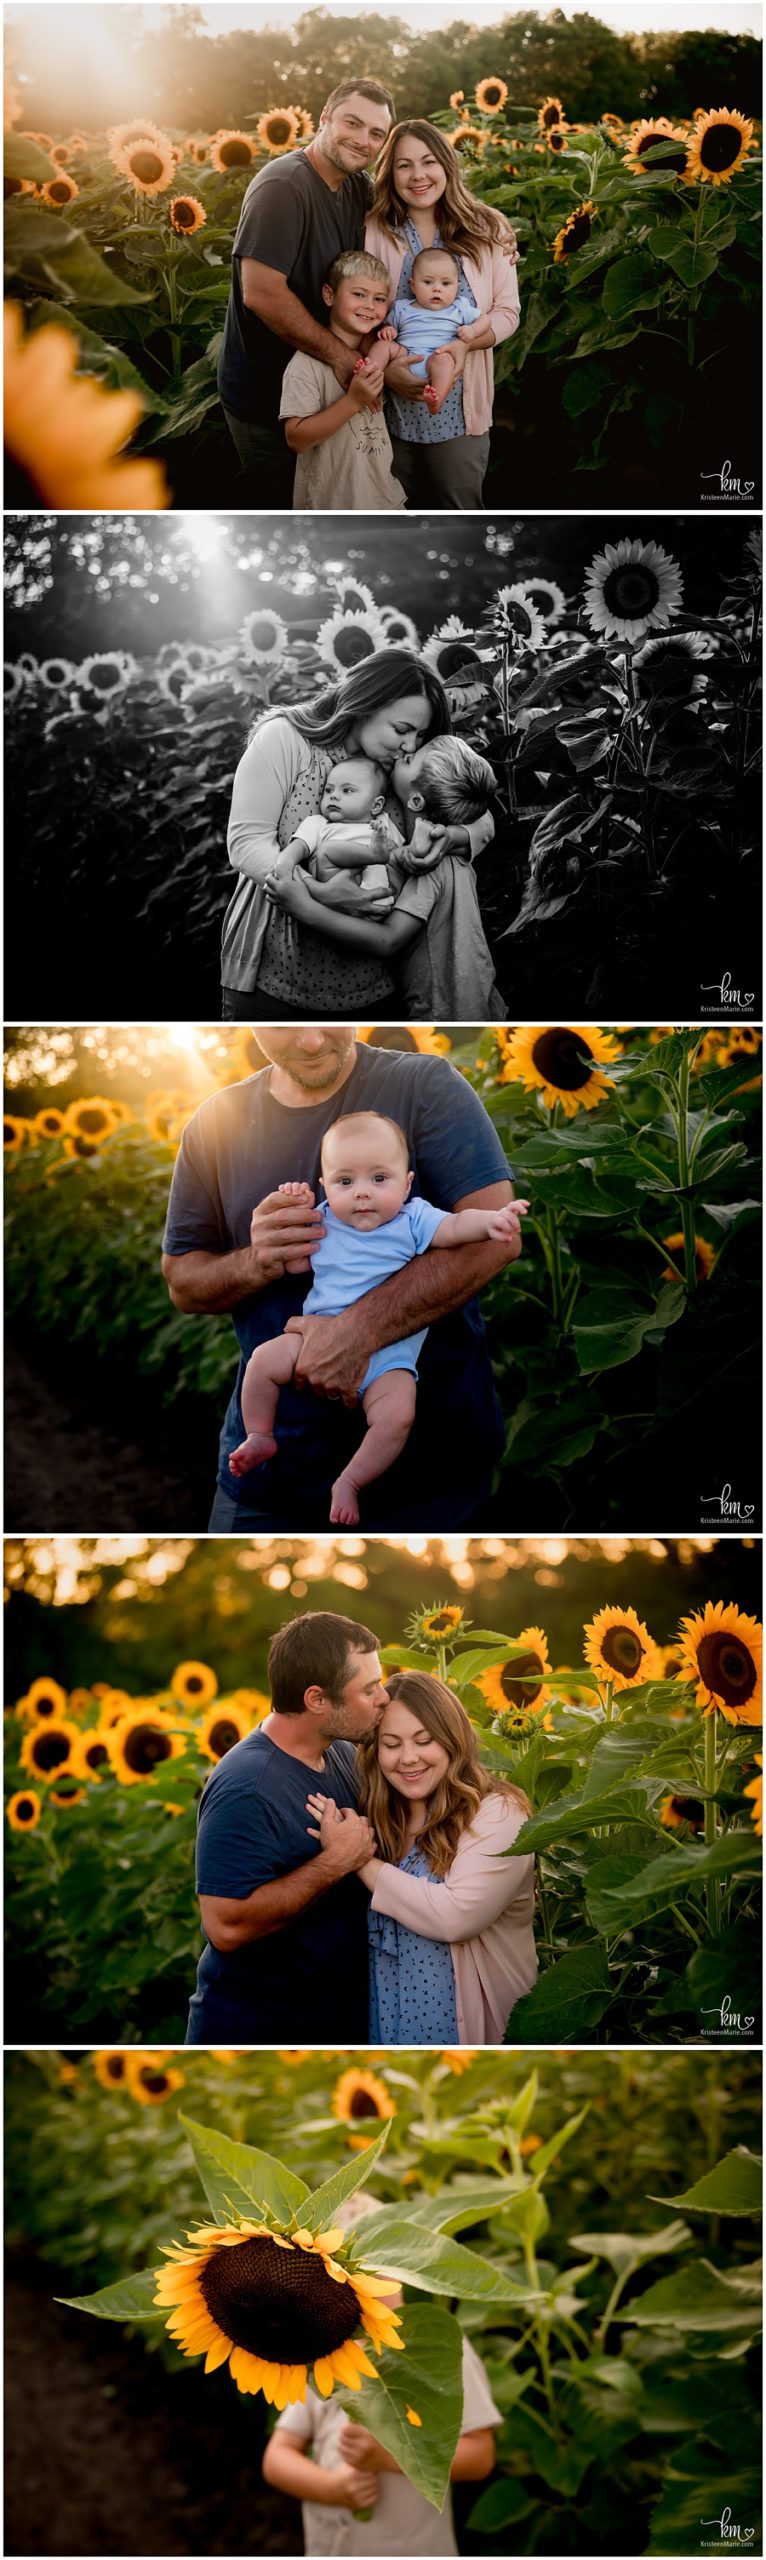 Indianapolis family photographer - sunflower session